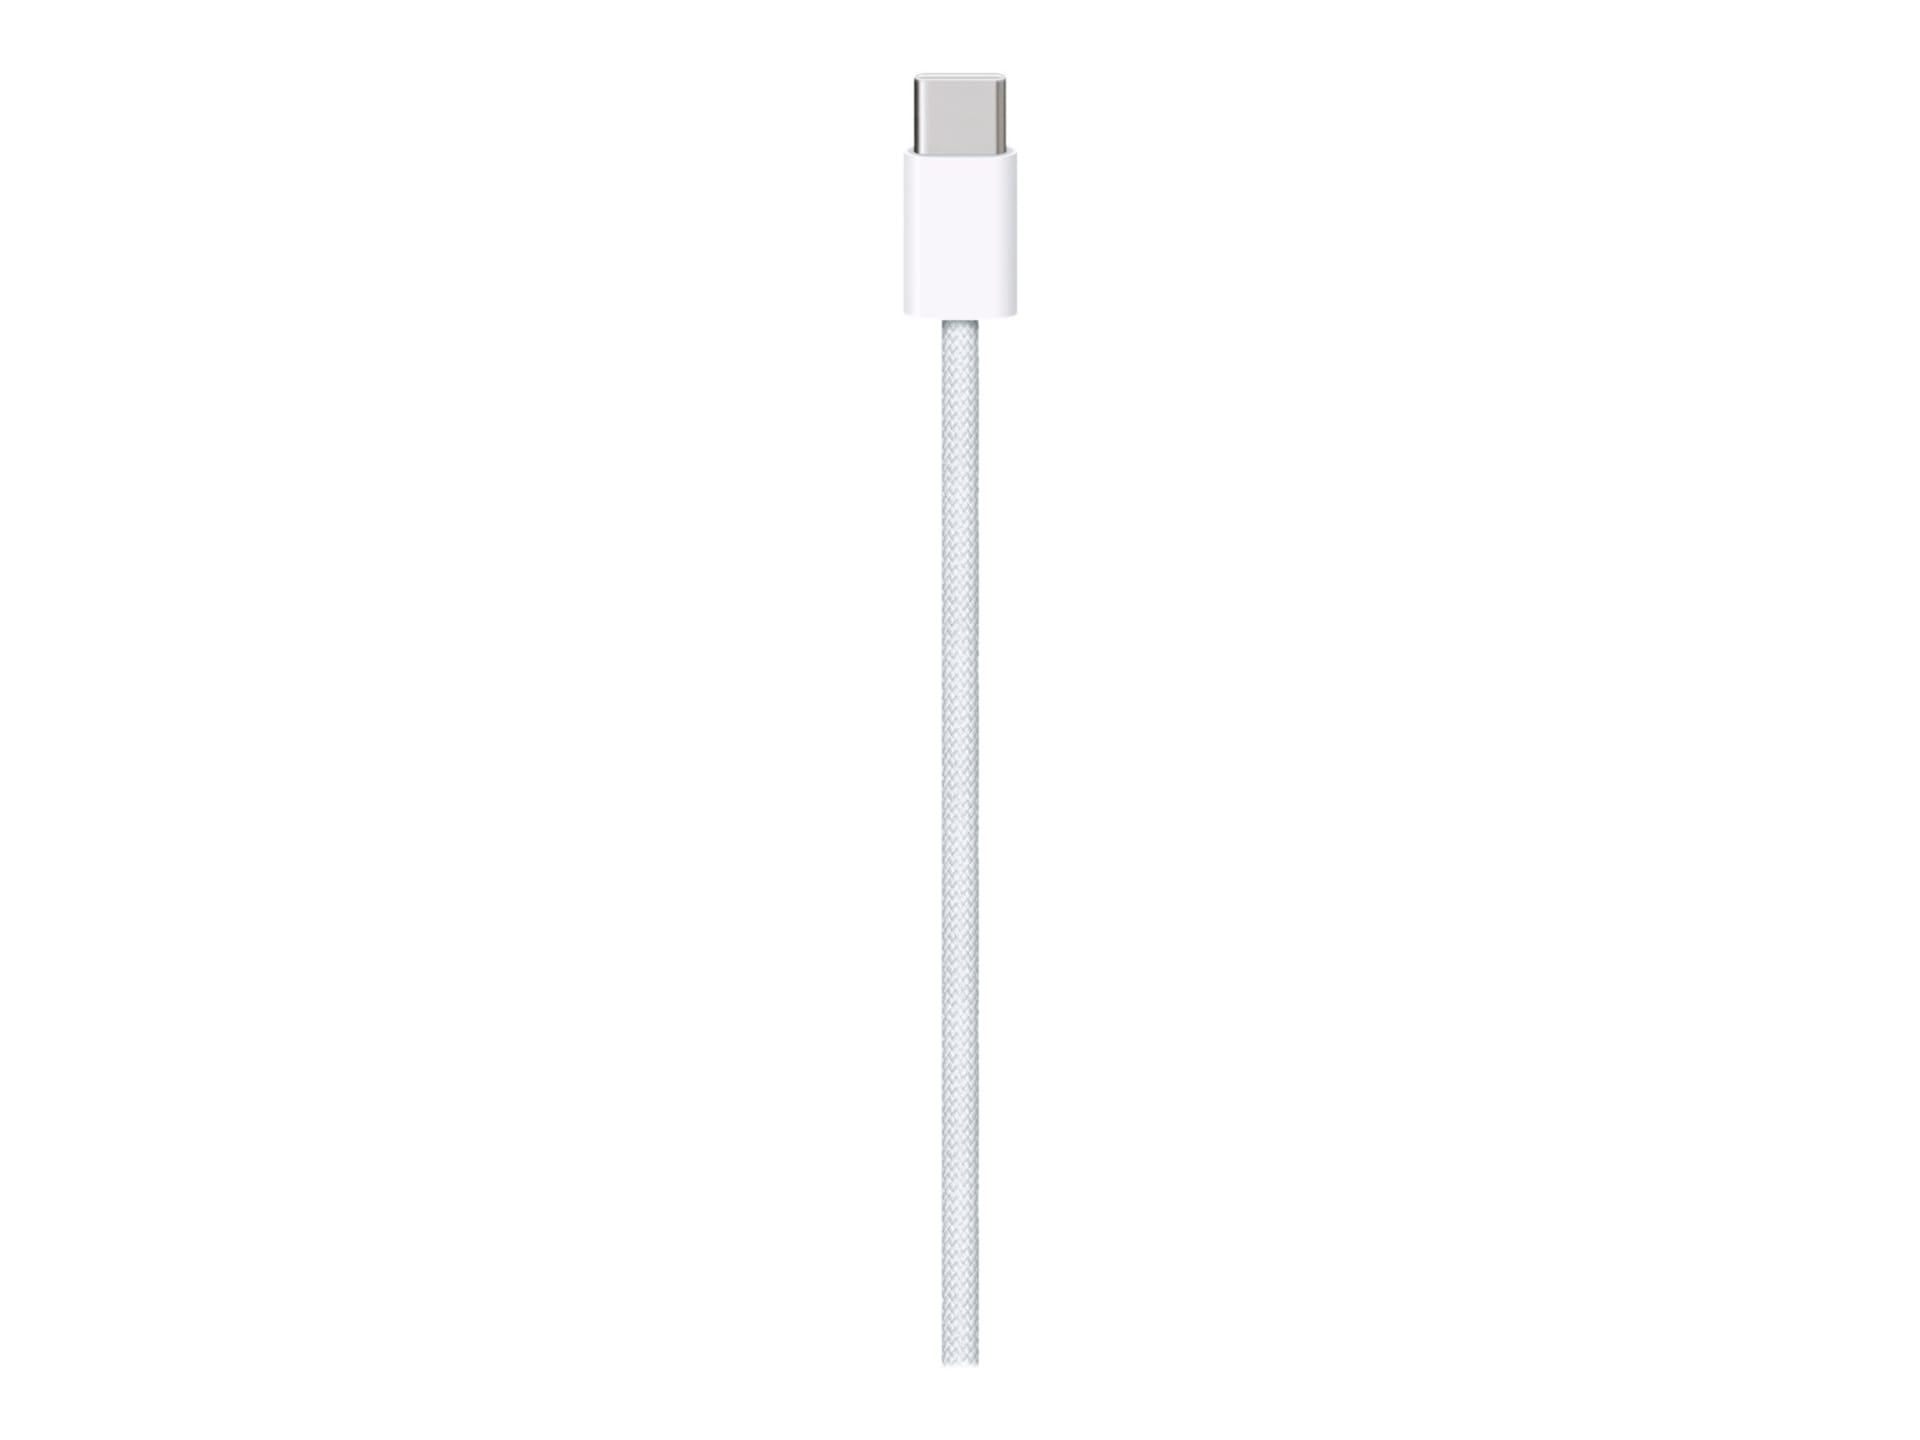 Apple - USB-C cable - 24 pin USB-C to 24 pin USB-C - 3.3 ft